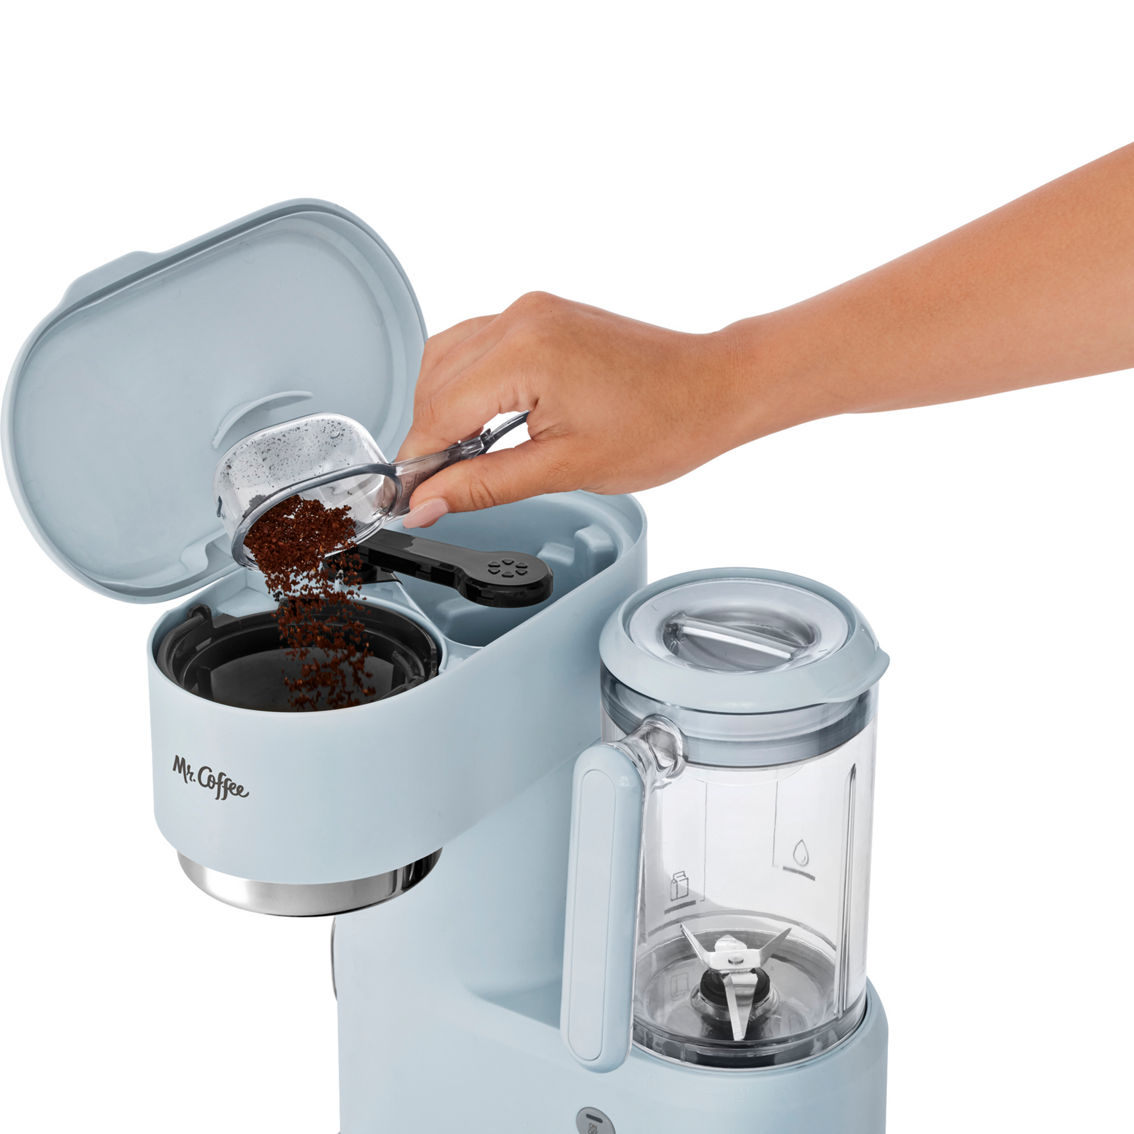 Mr. Coffee Frappe Hot and Cold Single Serve Coffee Maker - Image 5 of 7